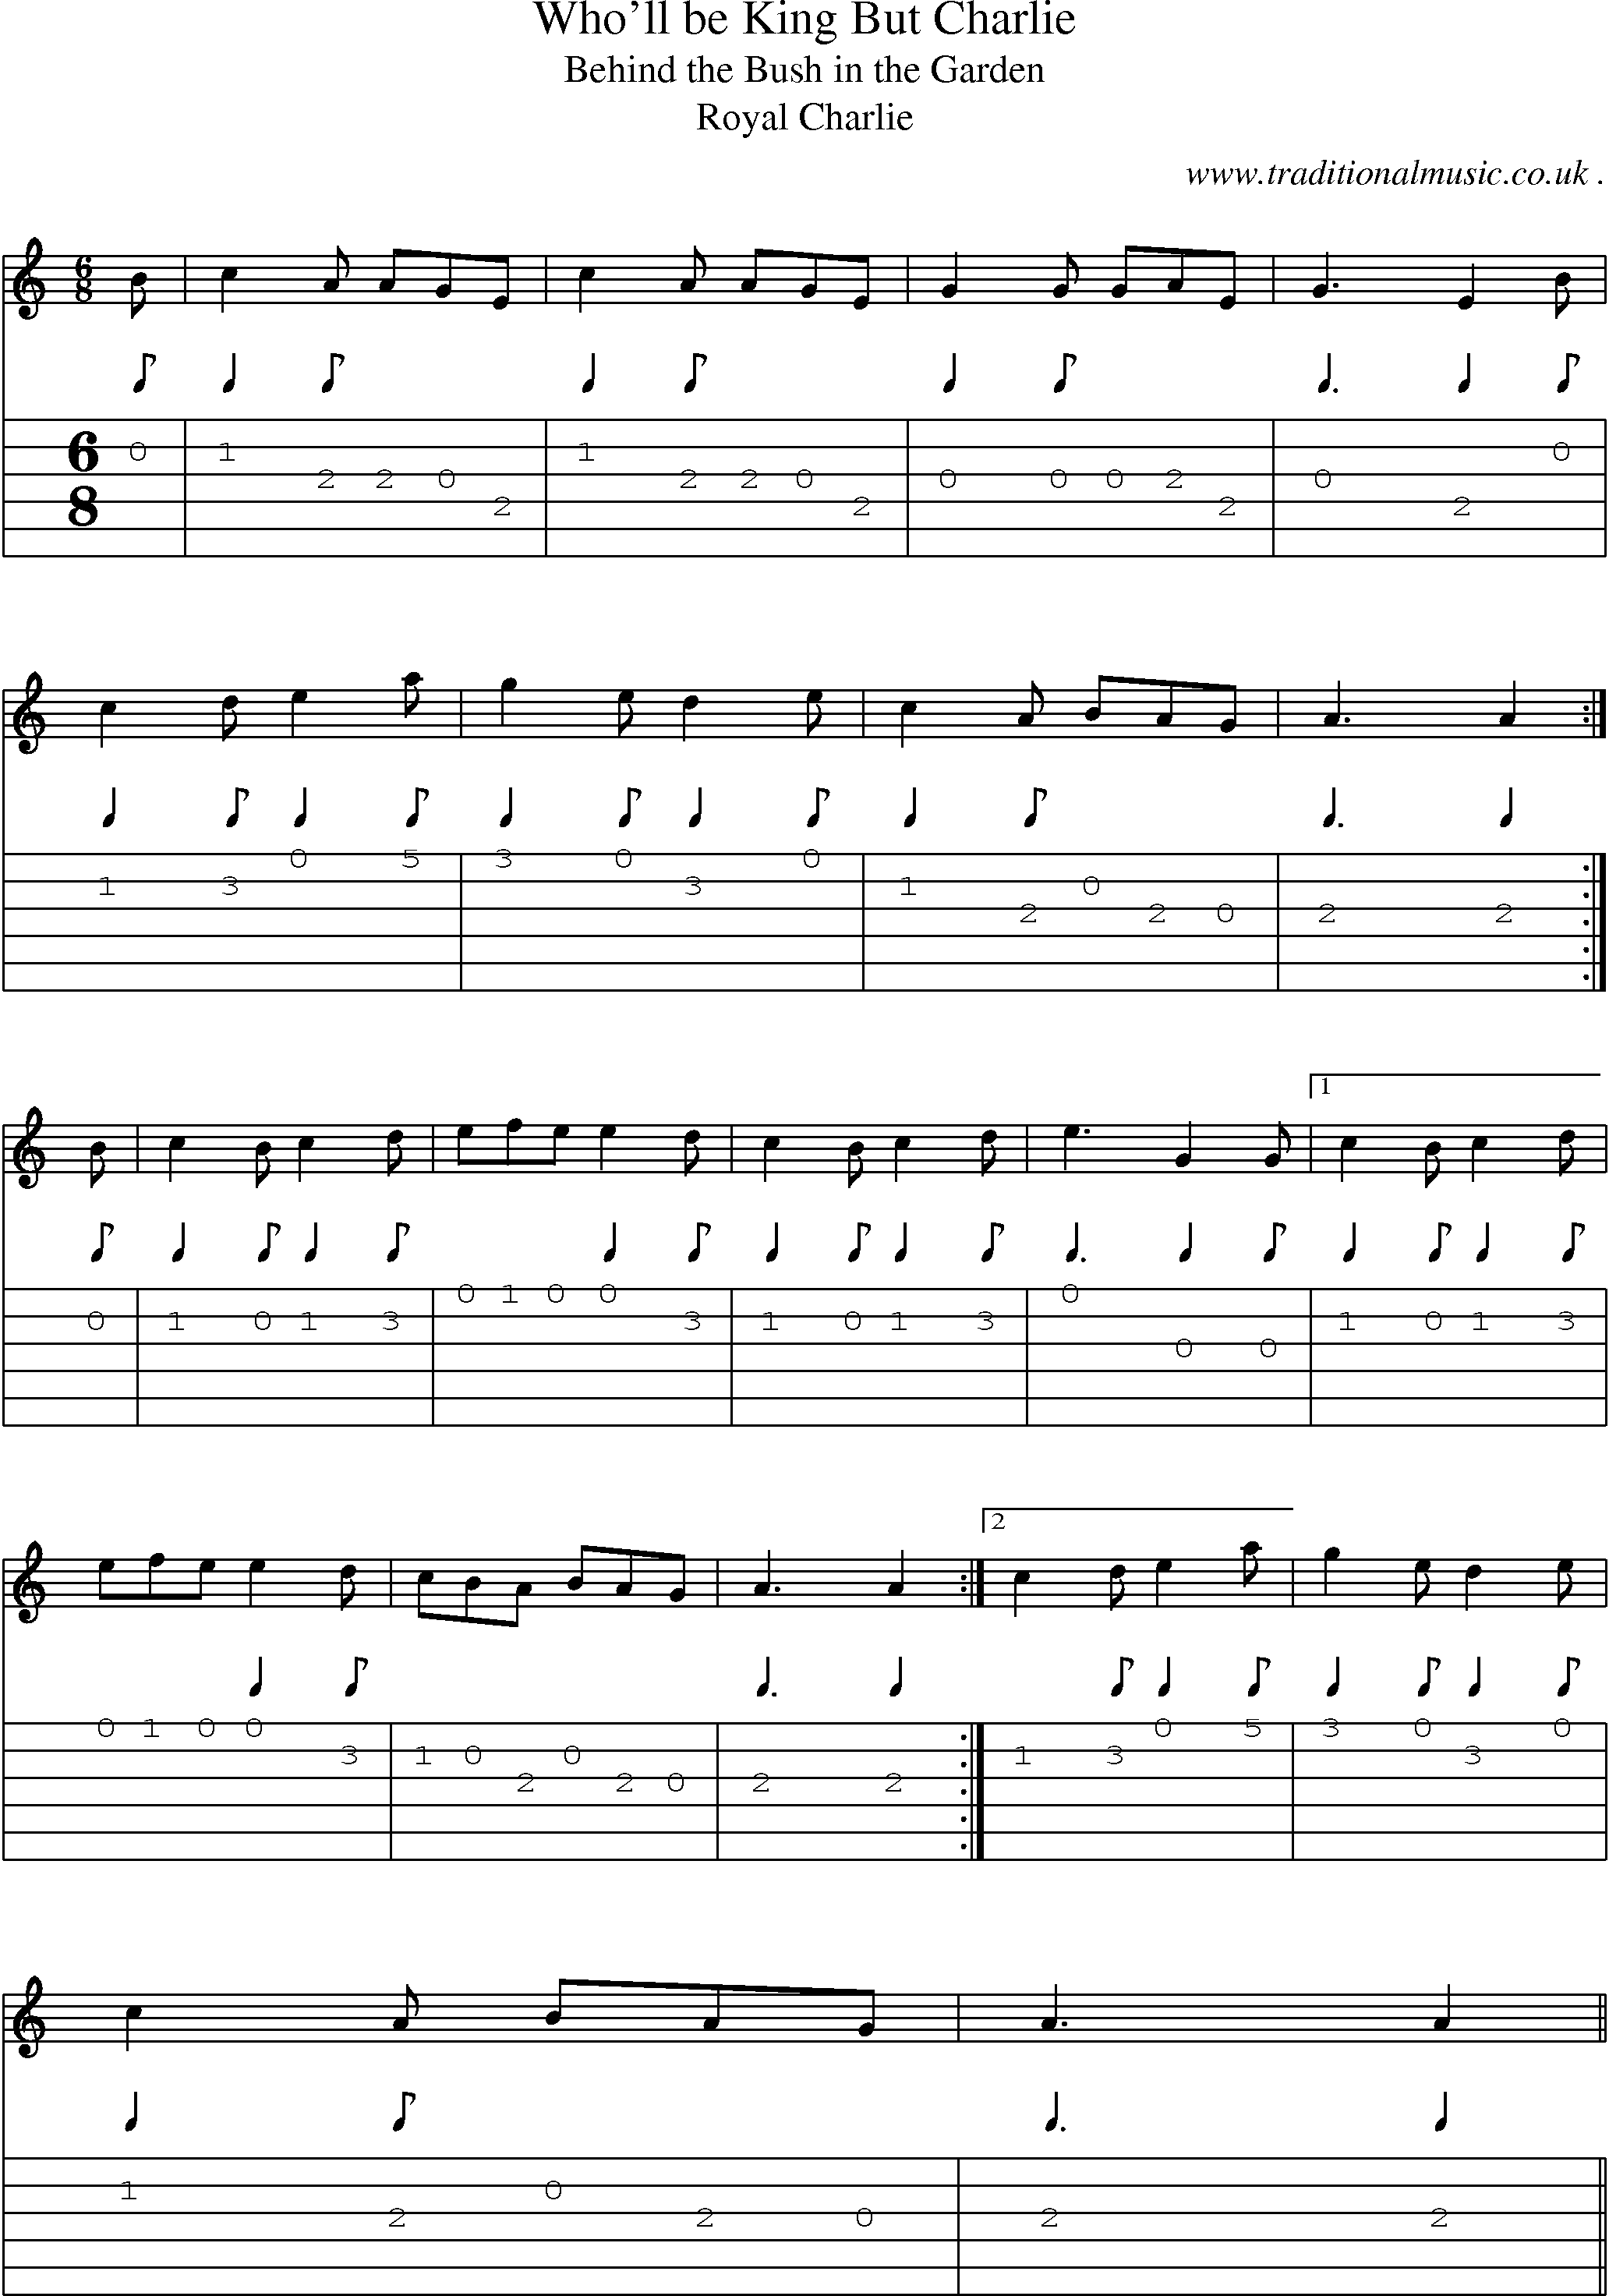 Sheet-Music and Guitar Tabs for Wholl Be King But Charlie